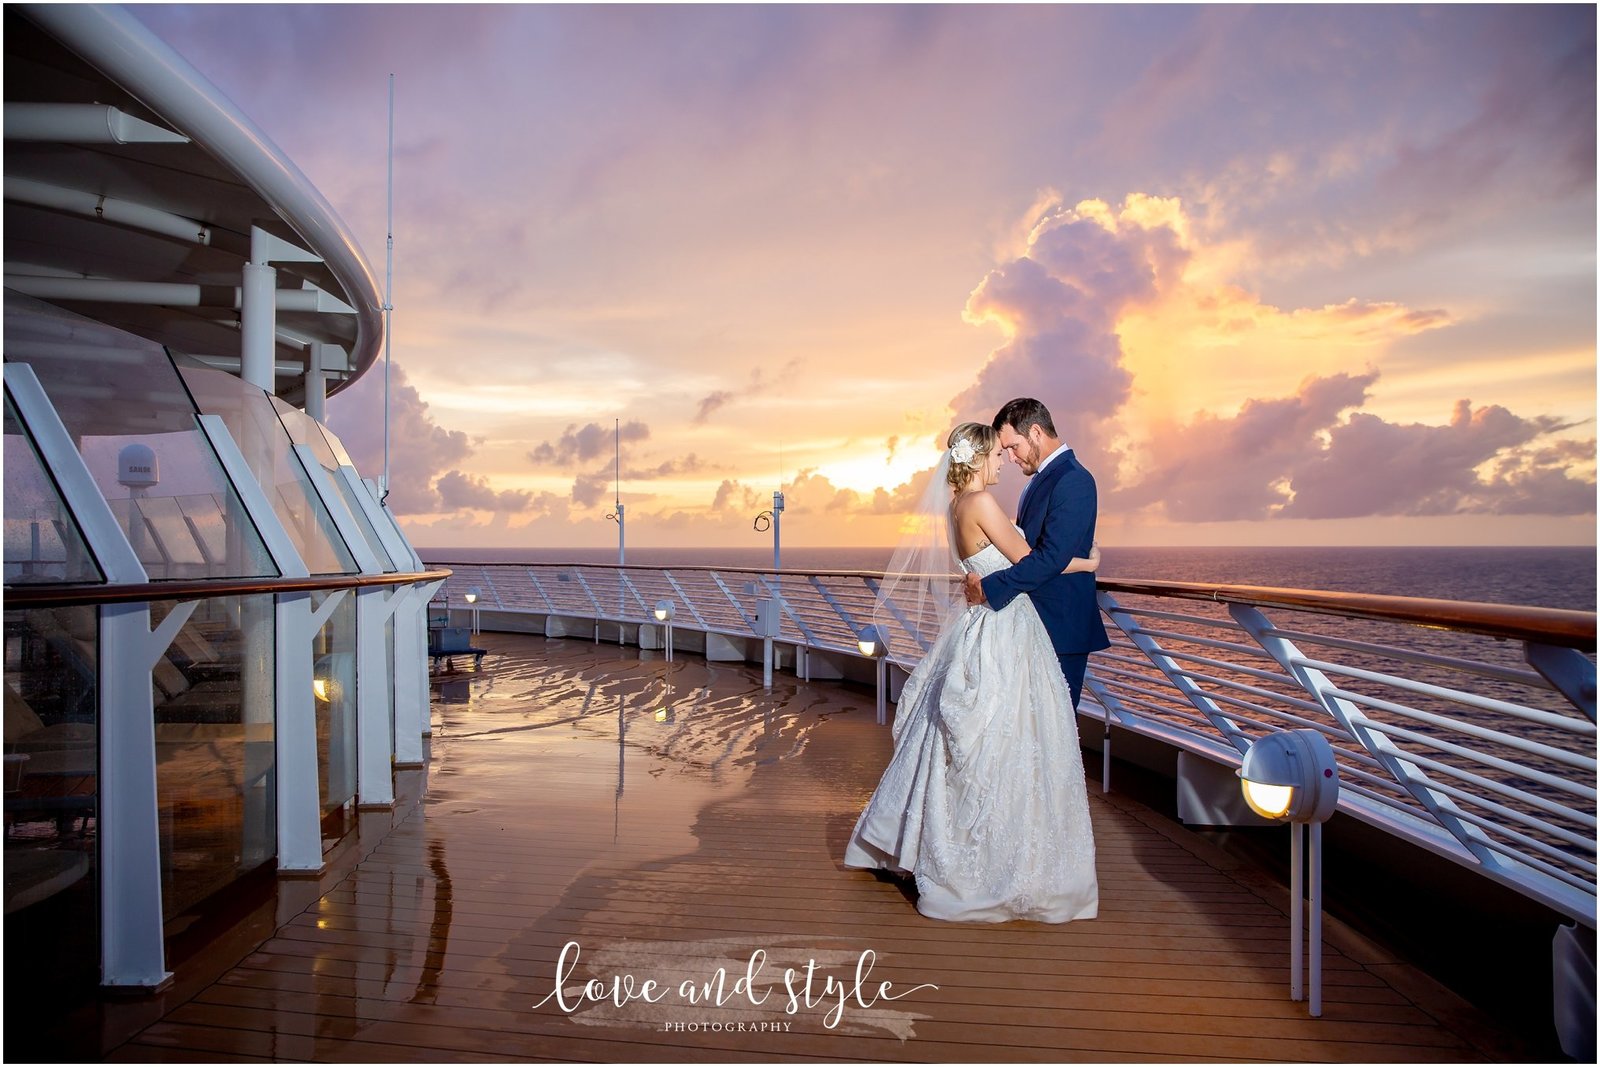 Disney Dream Cruise Wedding Photography bride and groom portrait on the deck with the sunset